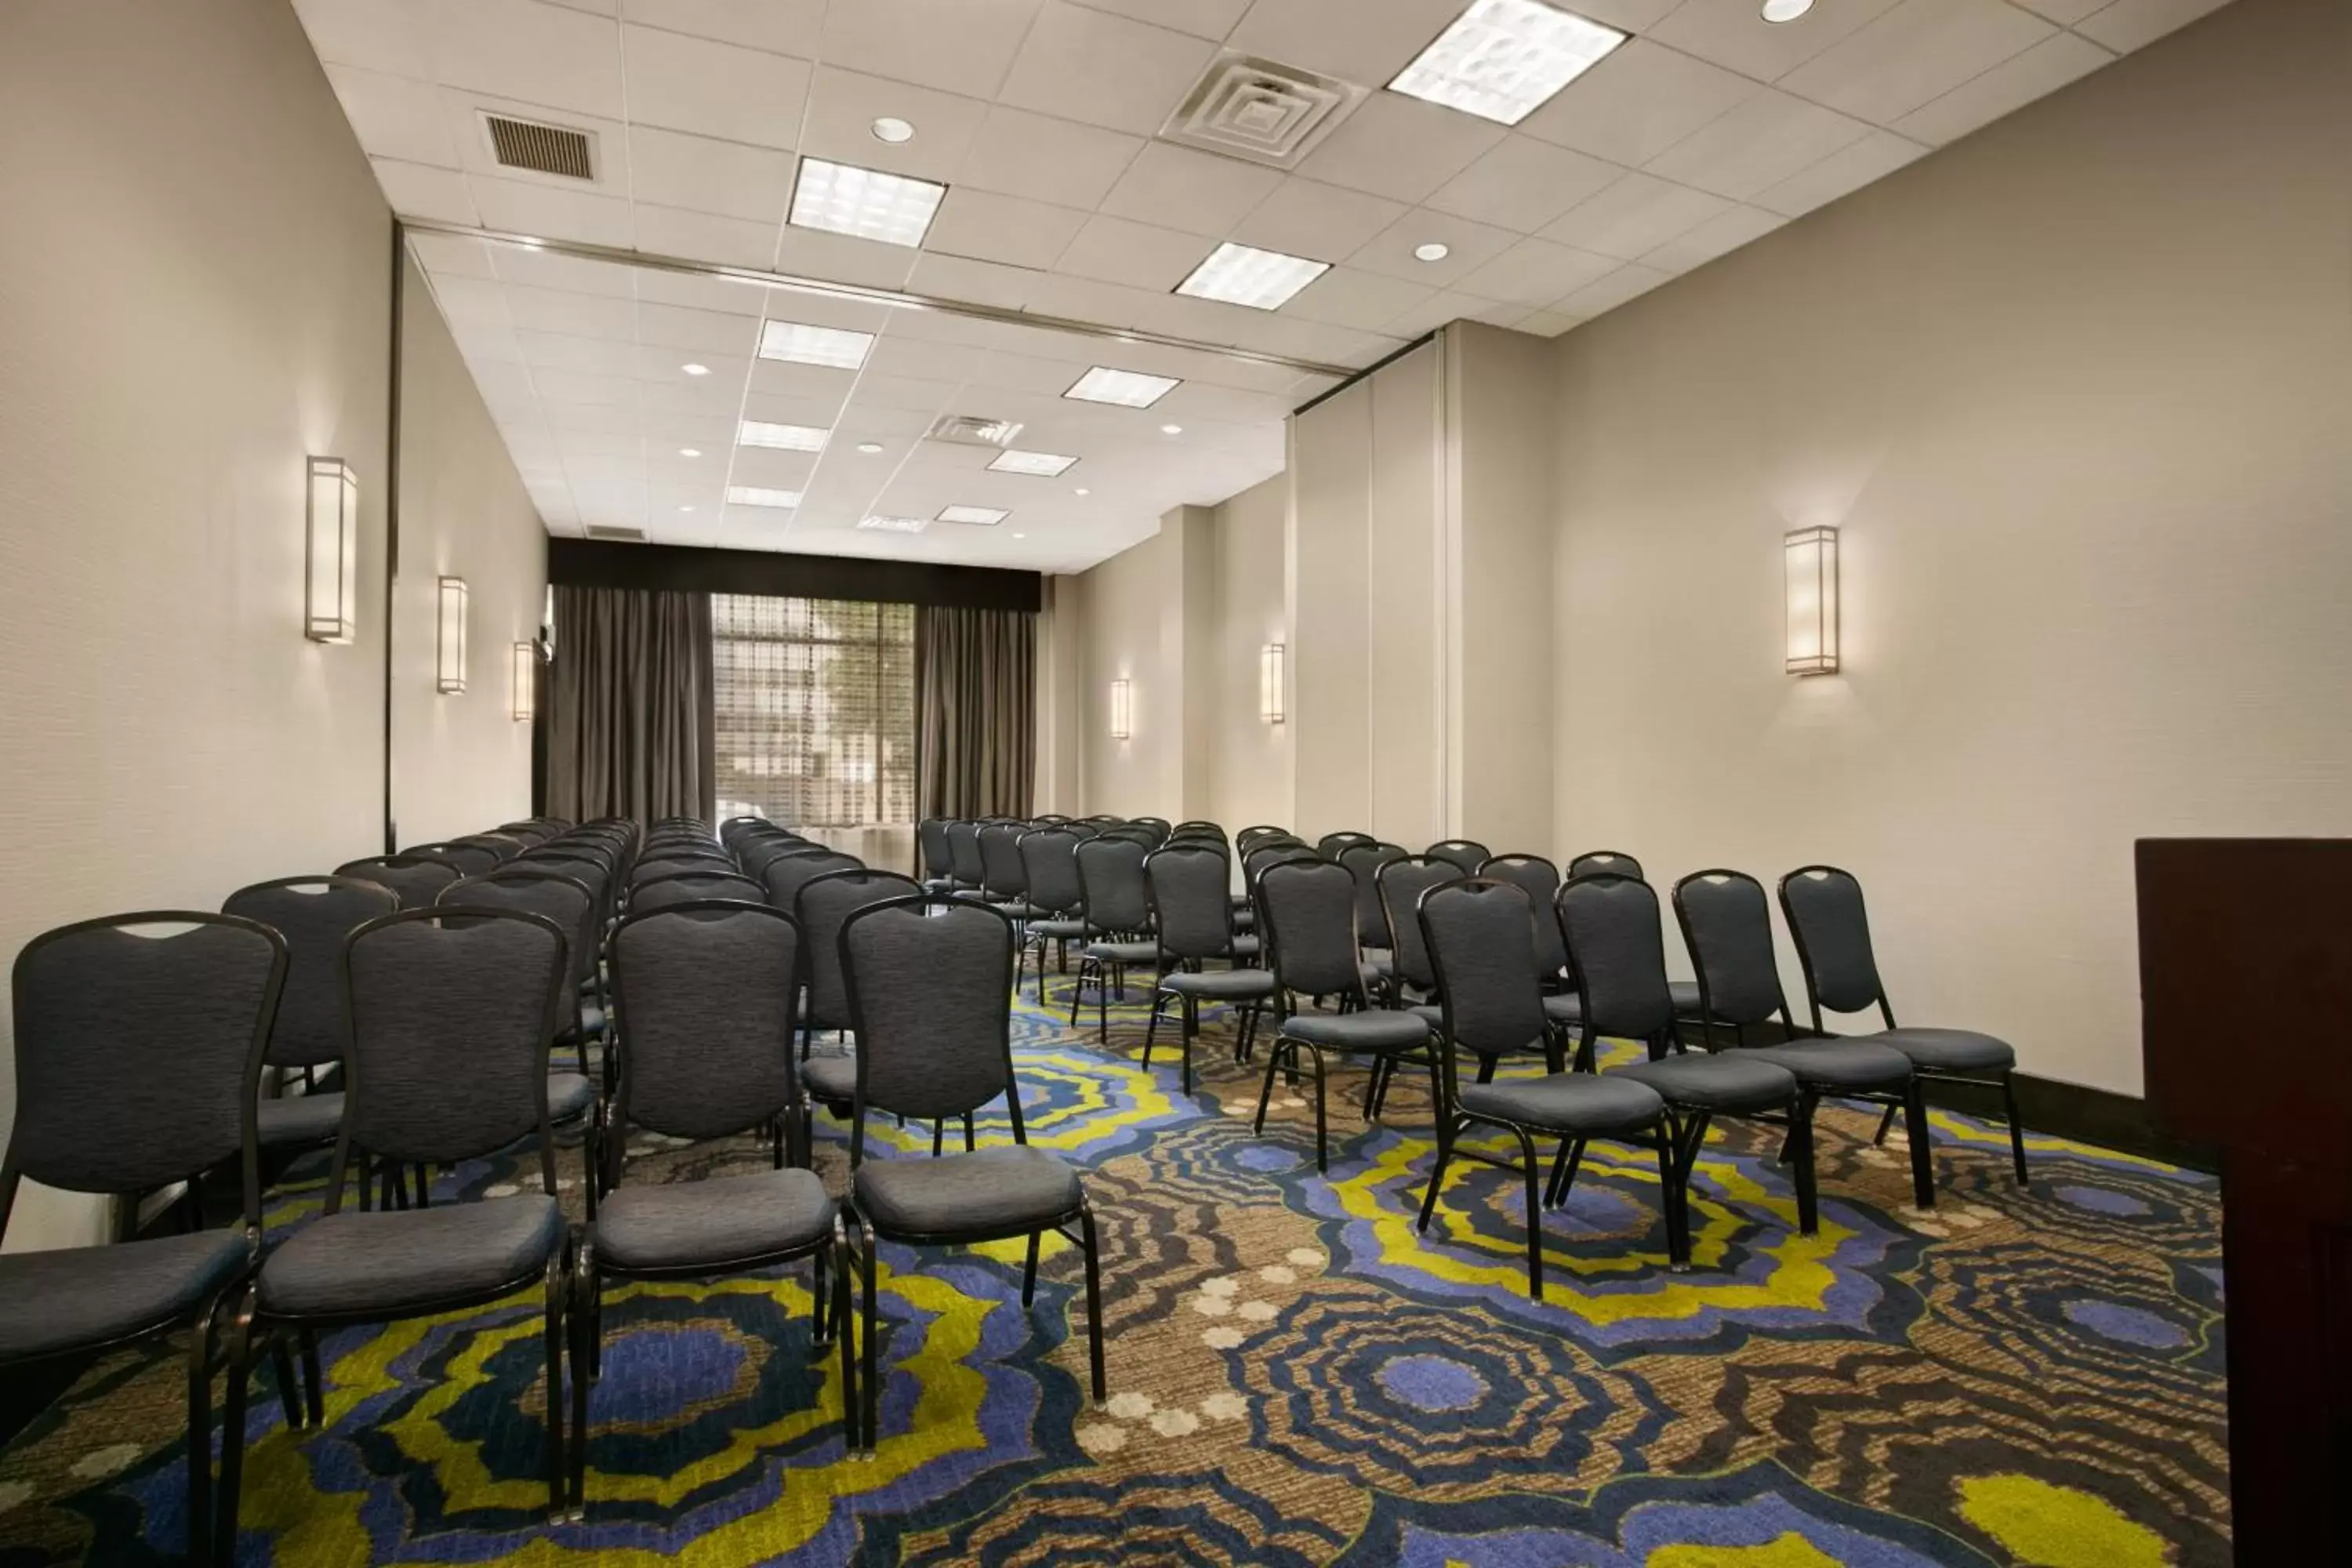 Business facilities in Wyndham Pittsburgh University Center